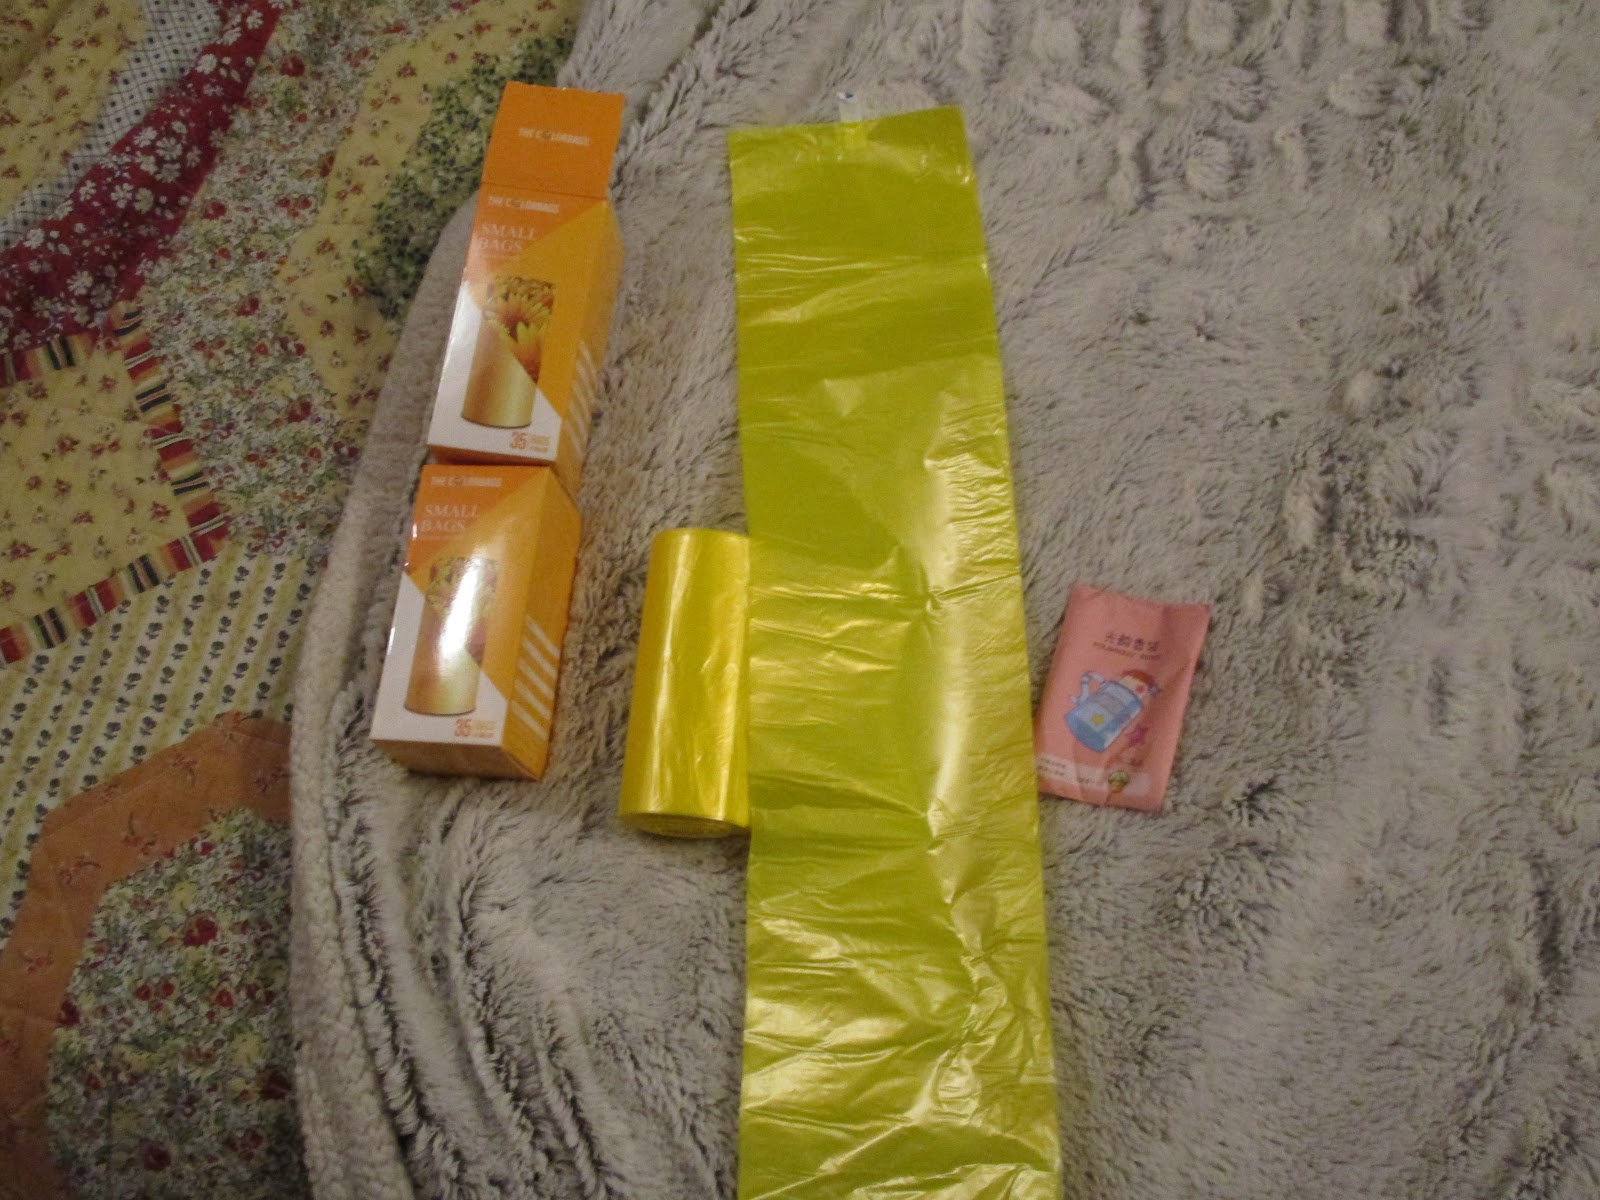 Missy's Product Reviews : FORID Small Yellow Trash Bags